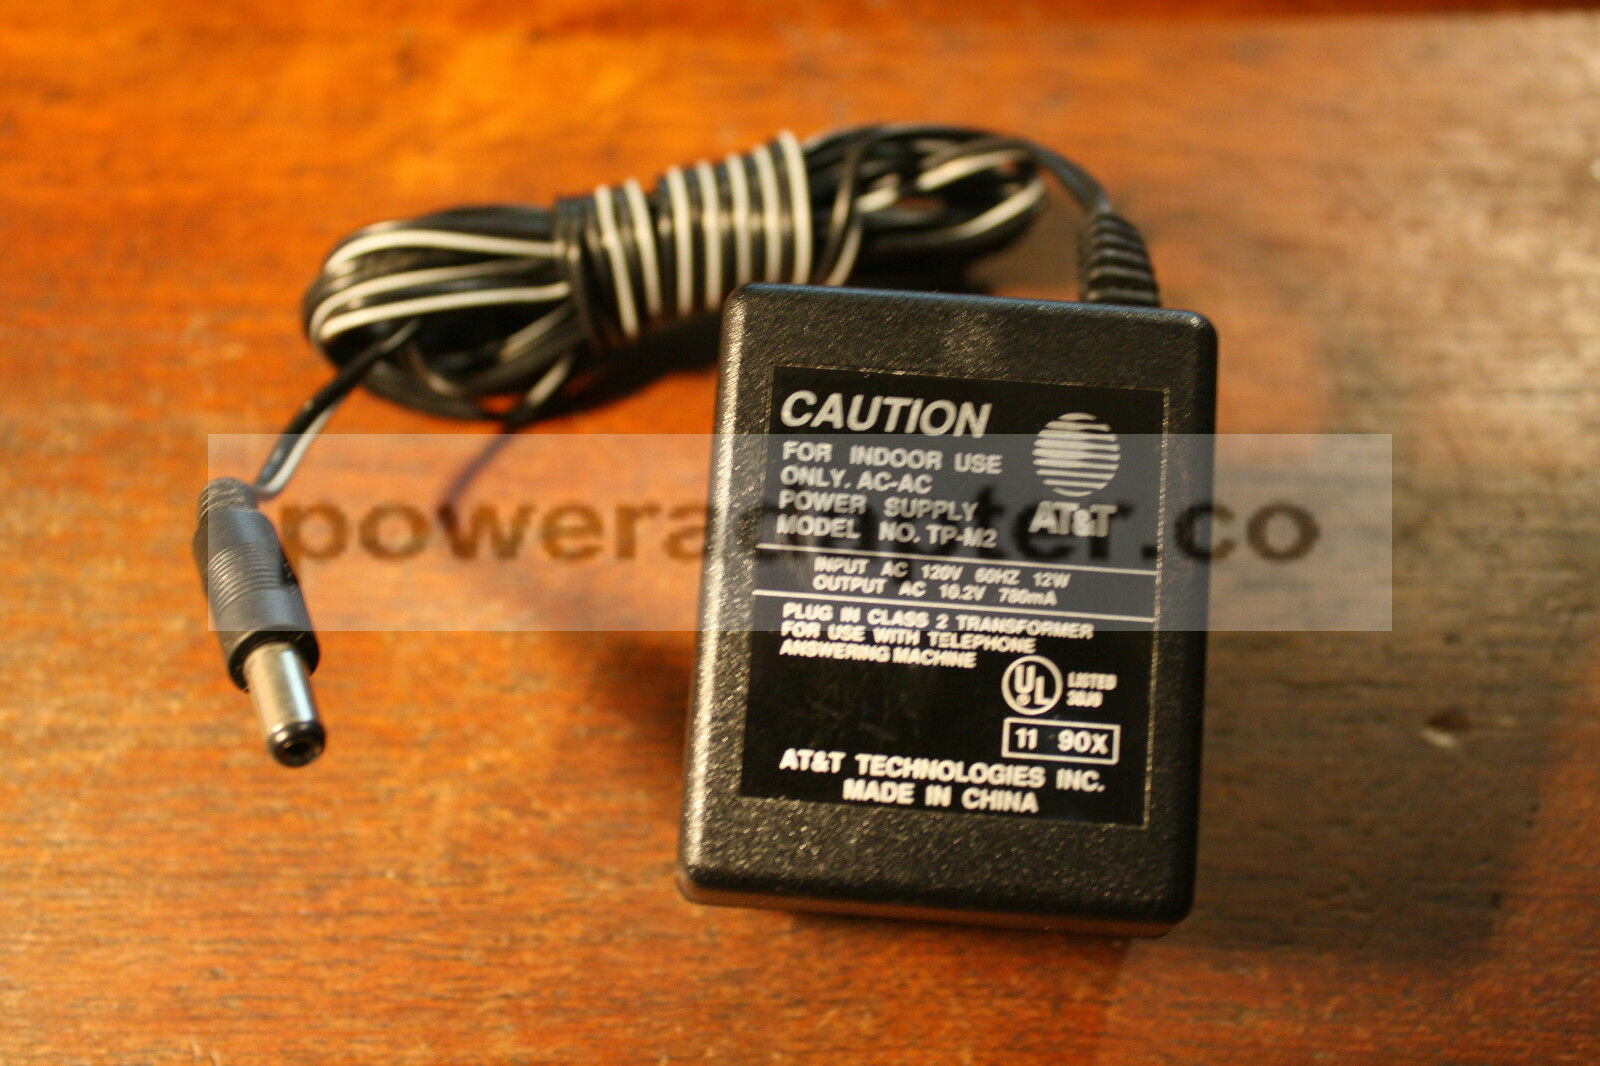 AT&T AC/AC Adapter Power Supply TP-M2 10.2V 780mA Condition: Used: An item that has been used previously. The item m - Click Image to Close